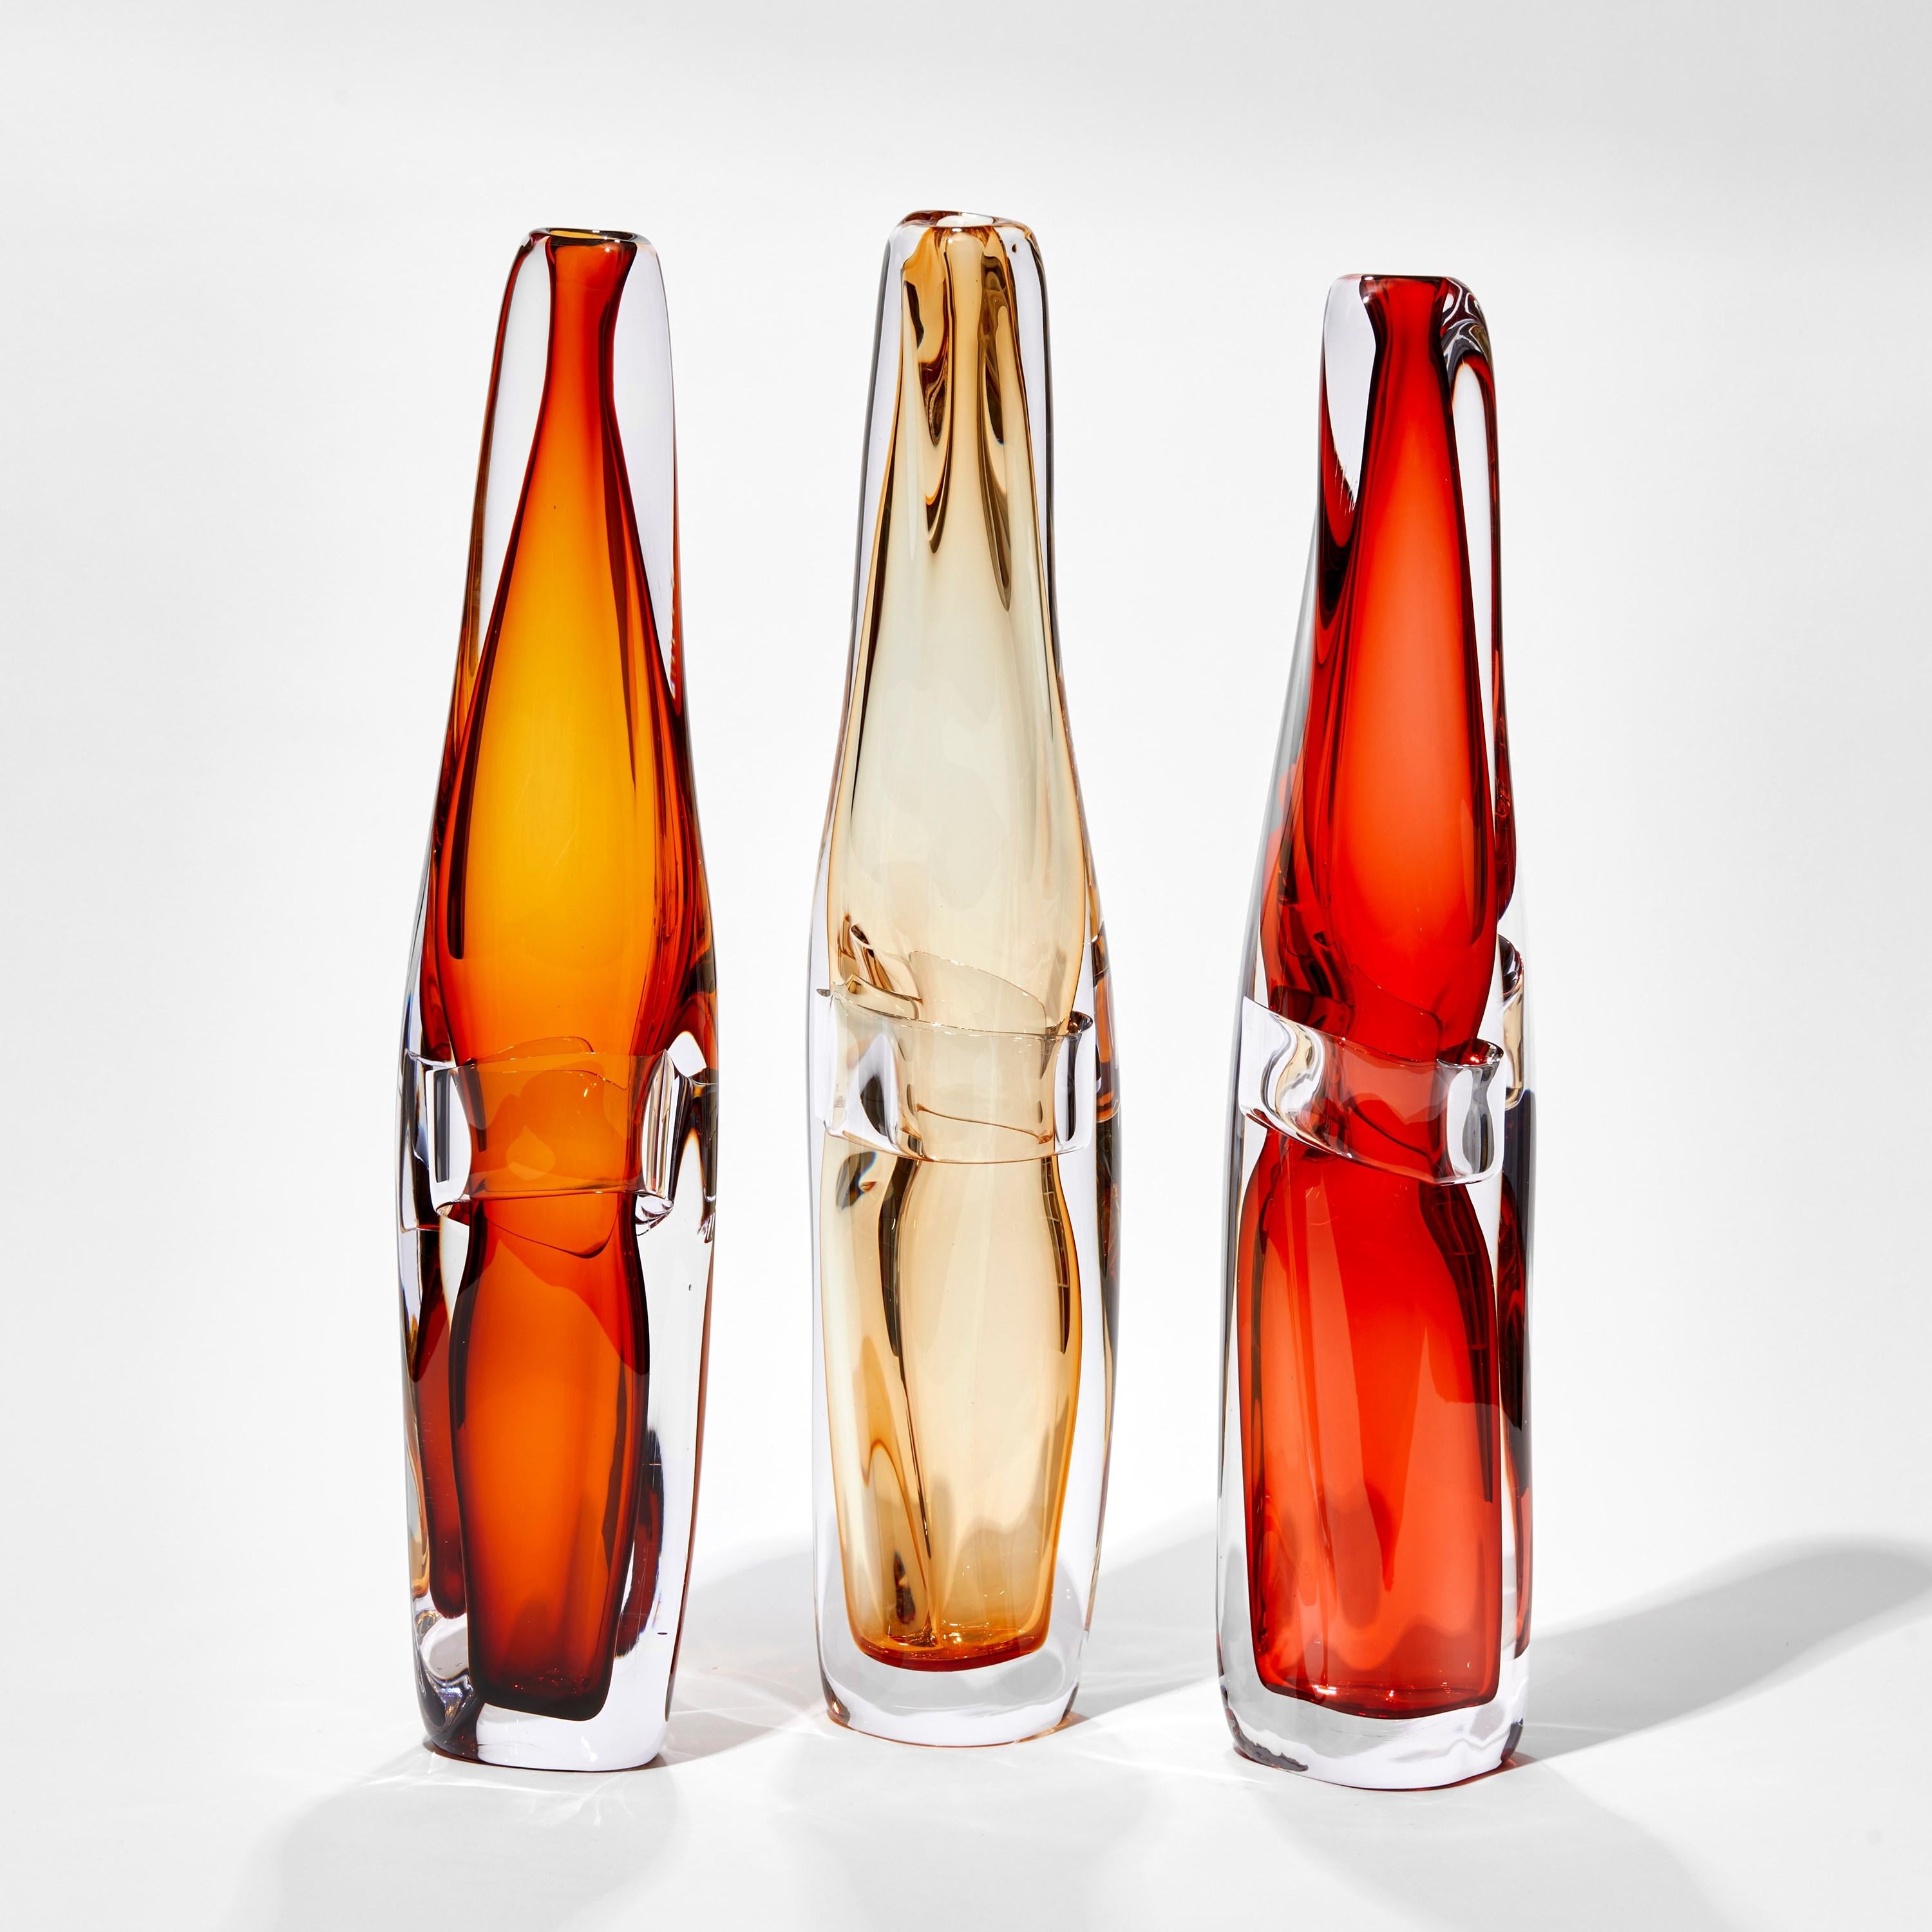 Organic Modern  Sommarial in Whiskey, a soft amber fluid handmade glass vase by Vic Bamforth